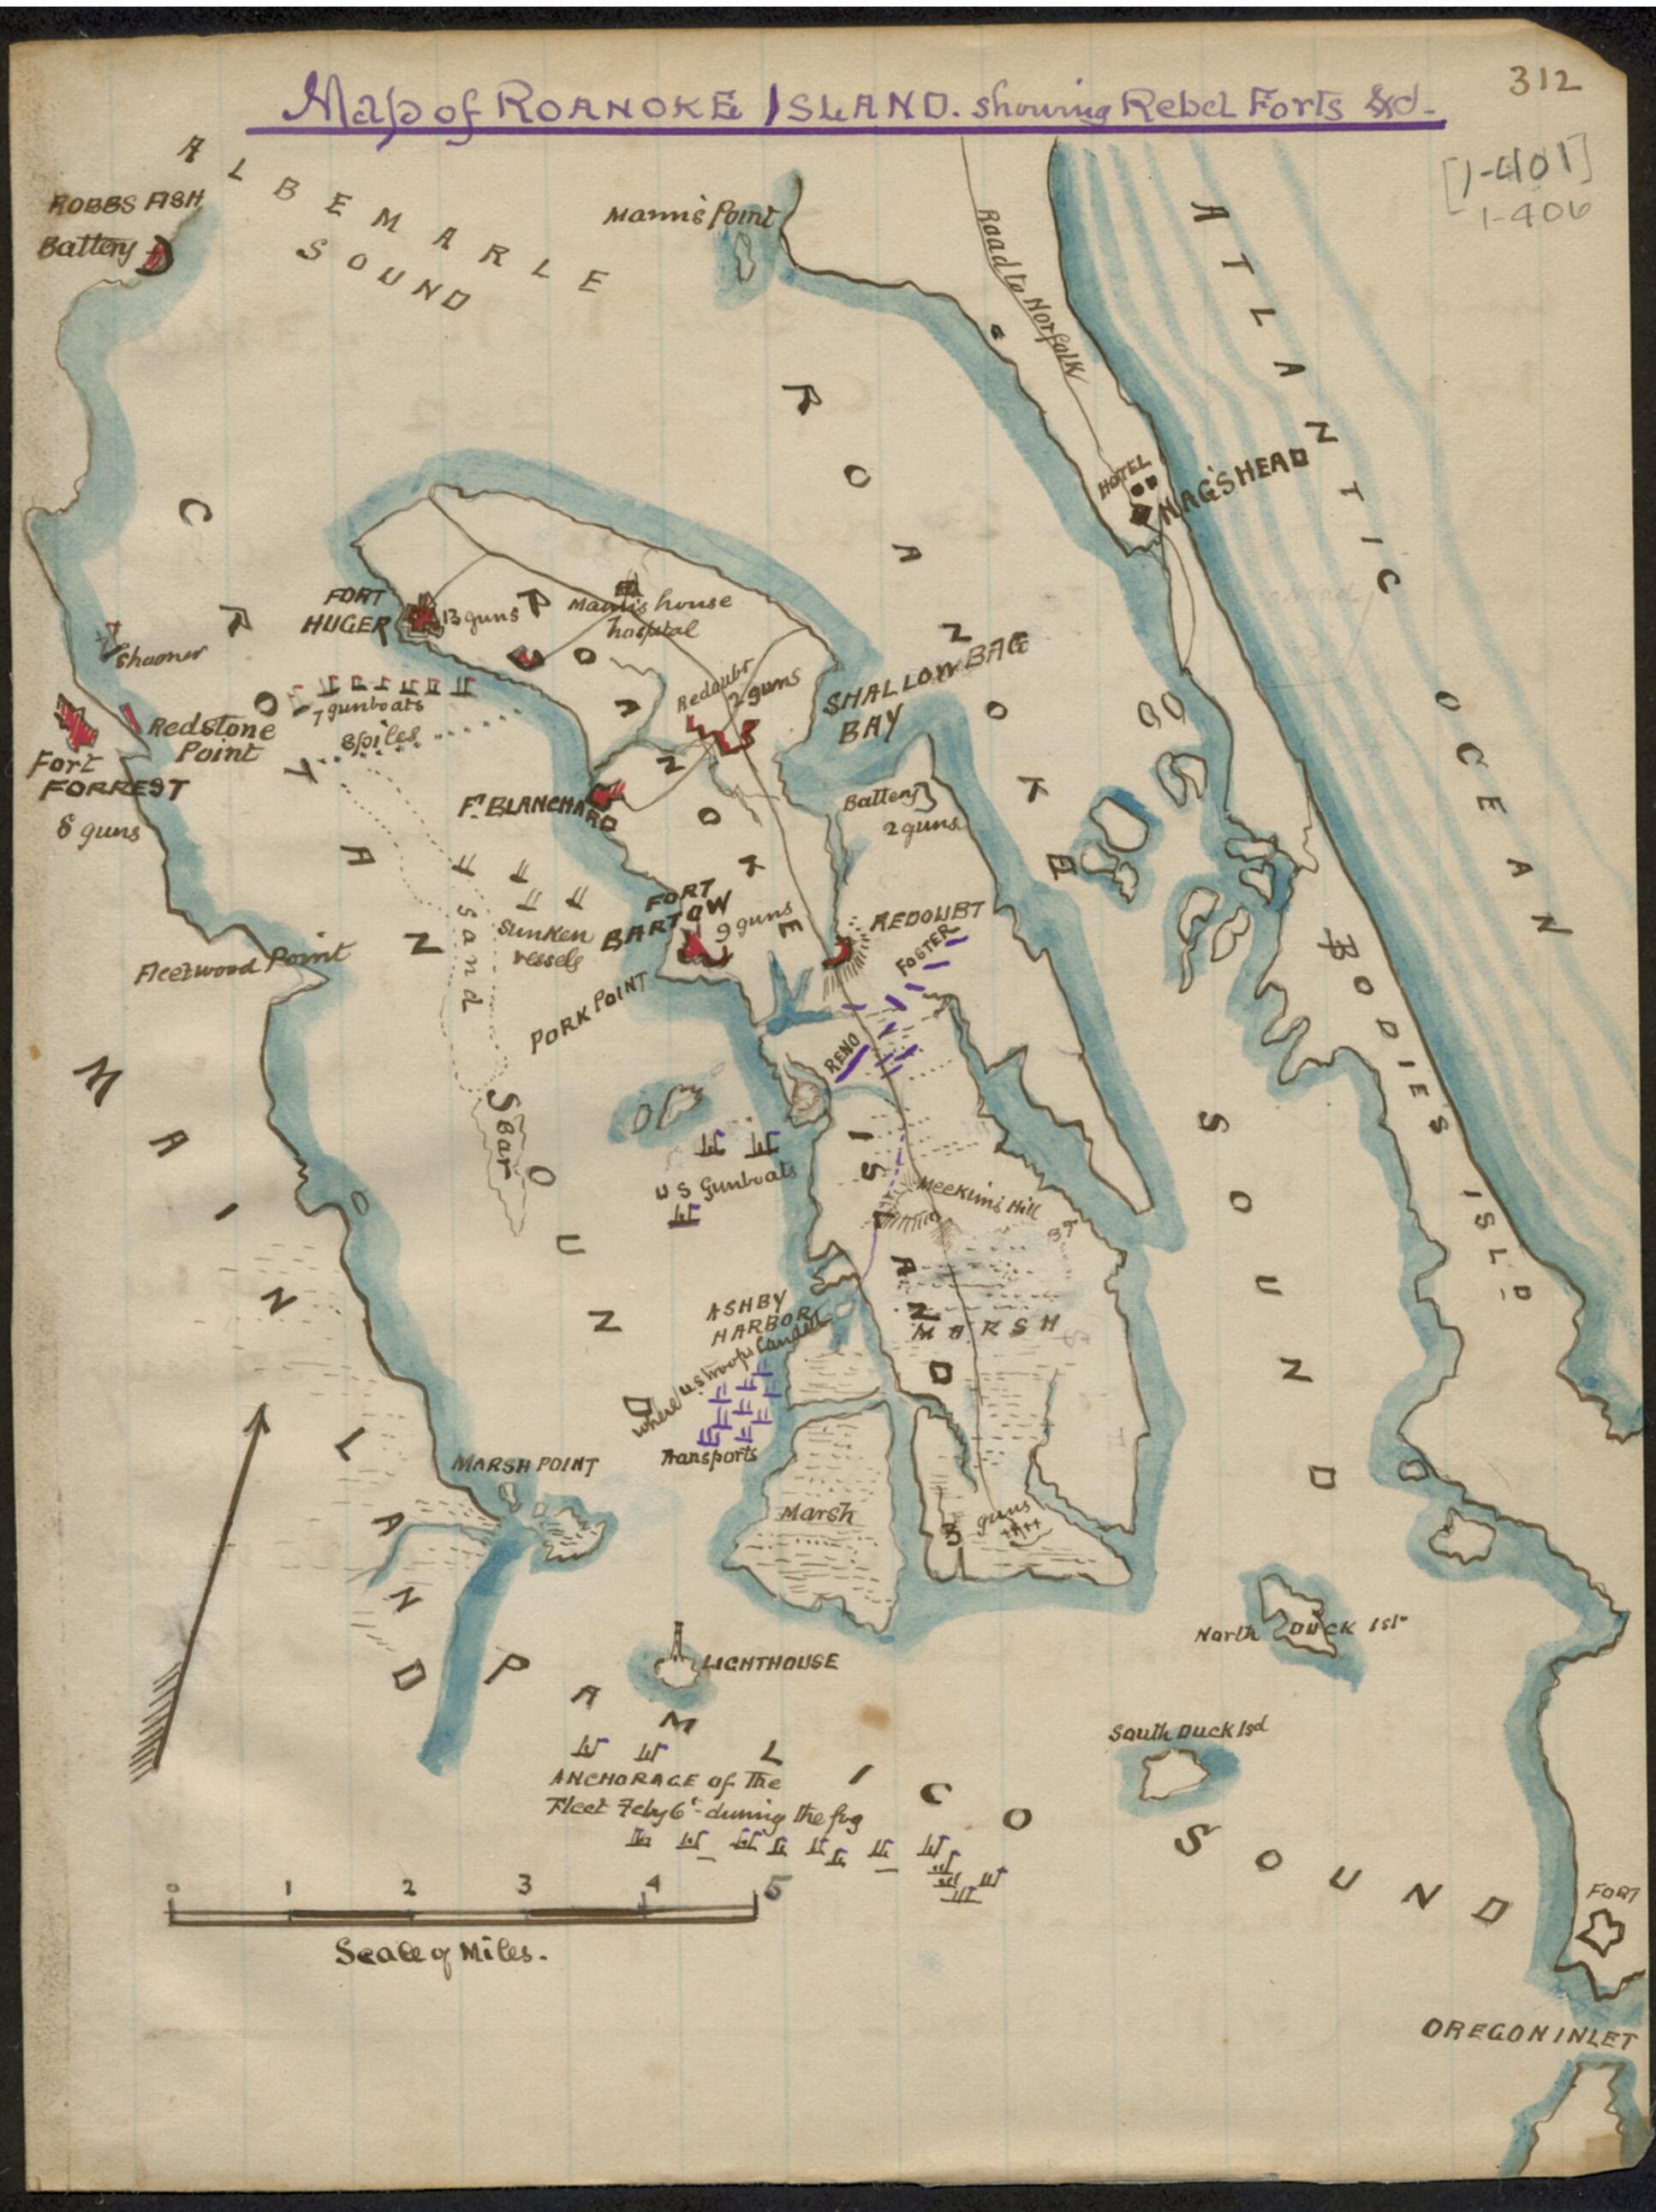 This old map of Map of Roanoke Island Showing Rebel Forts from 1862 was created by Robert Knox Sneden in 1862